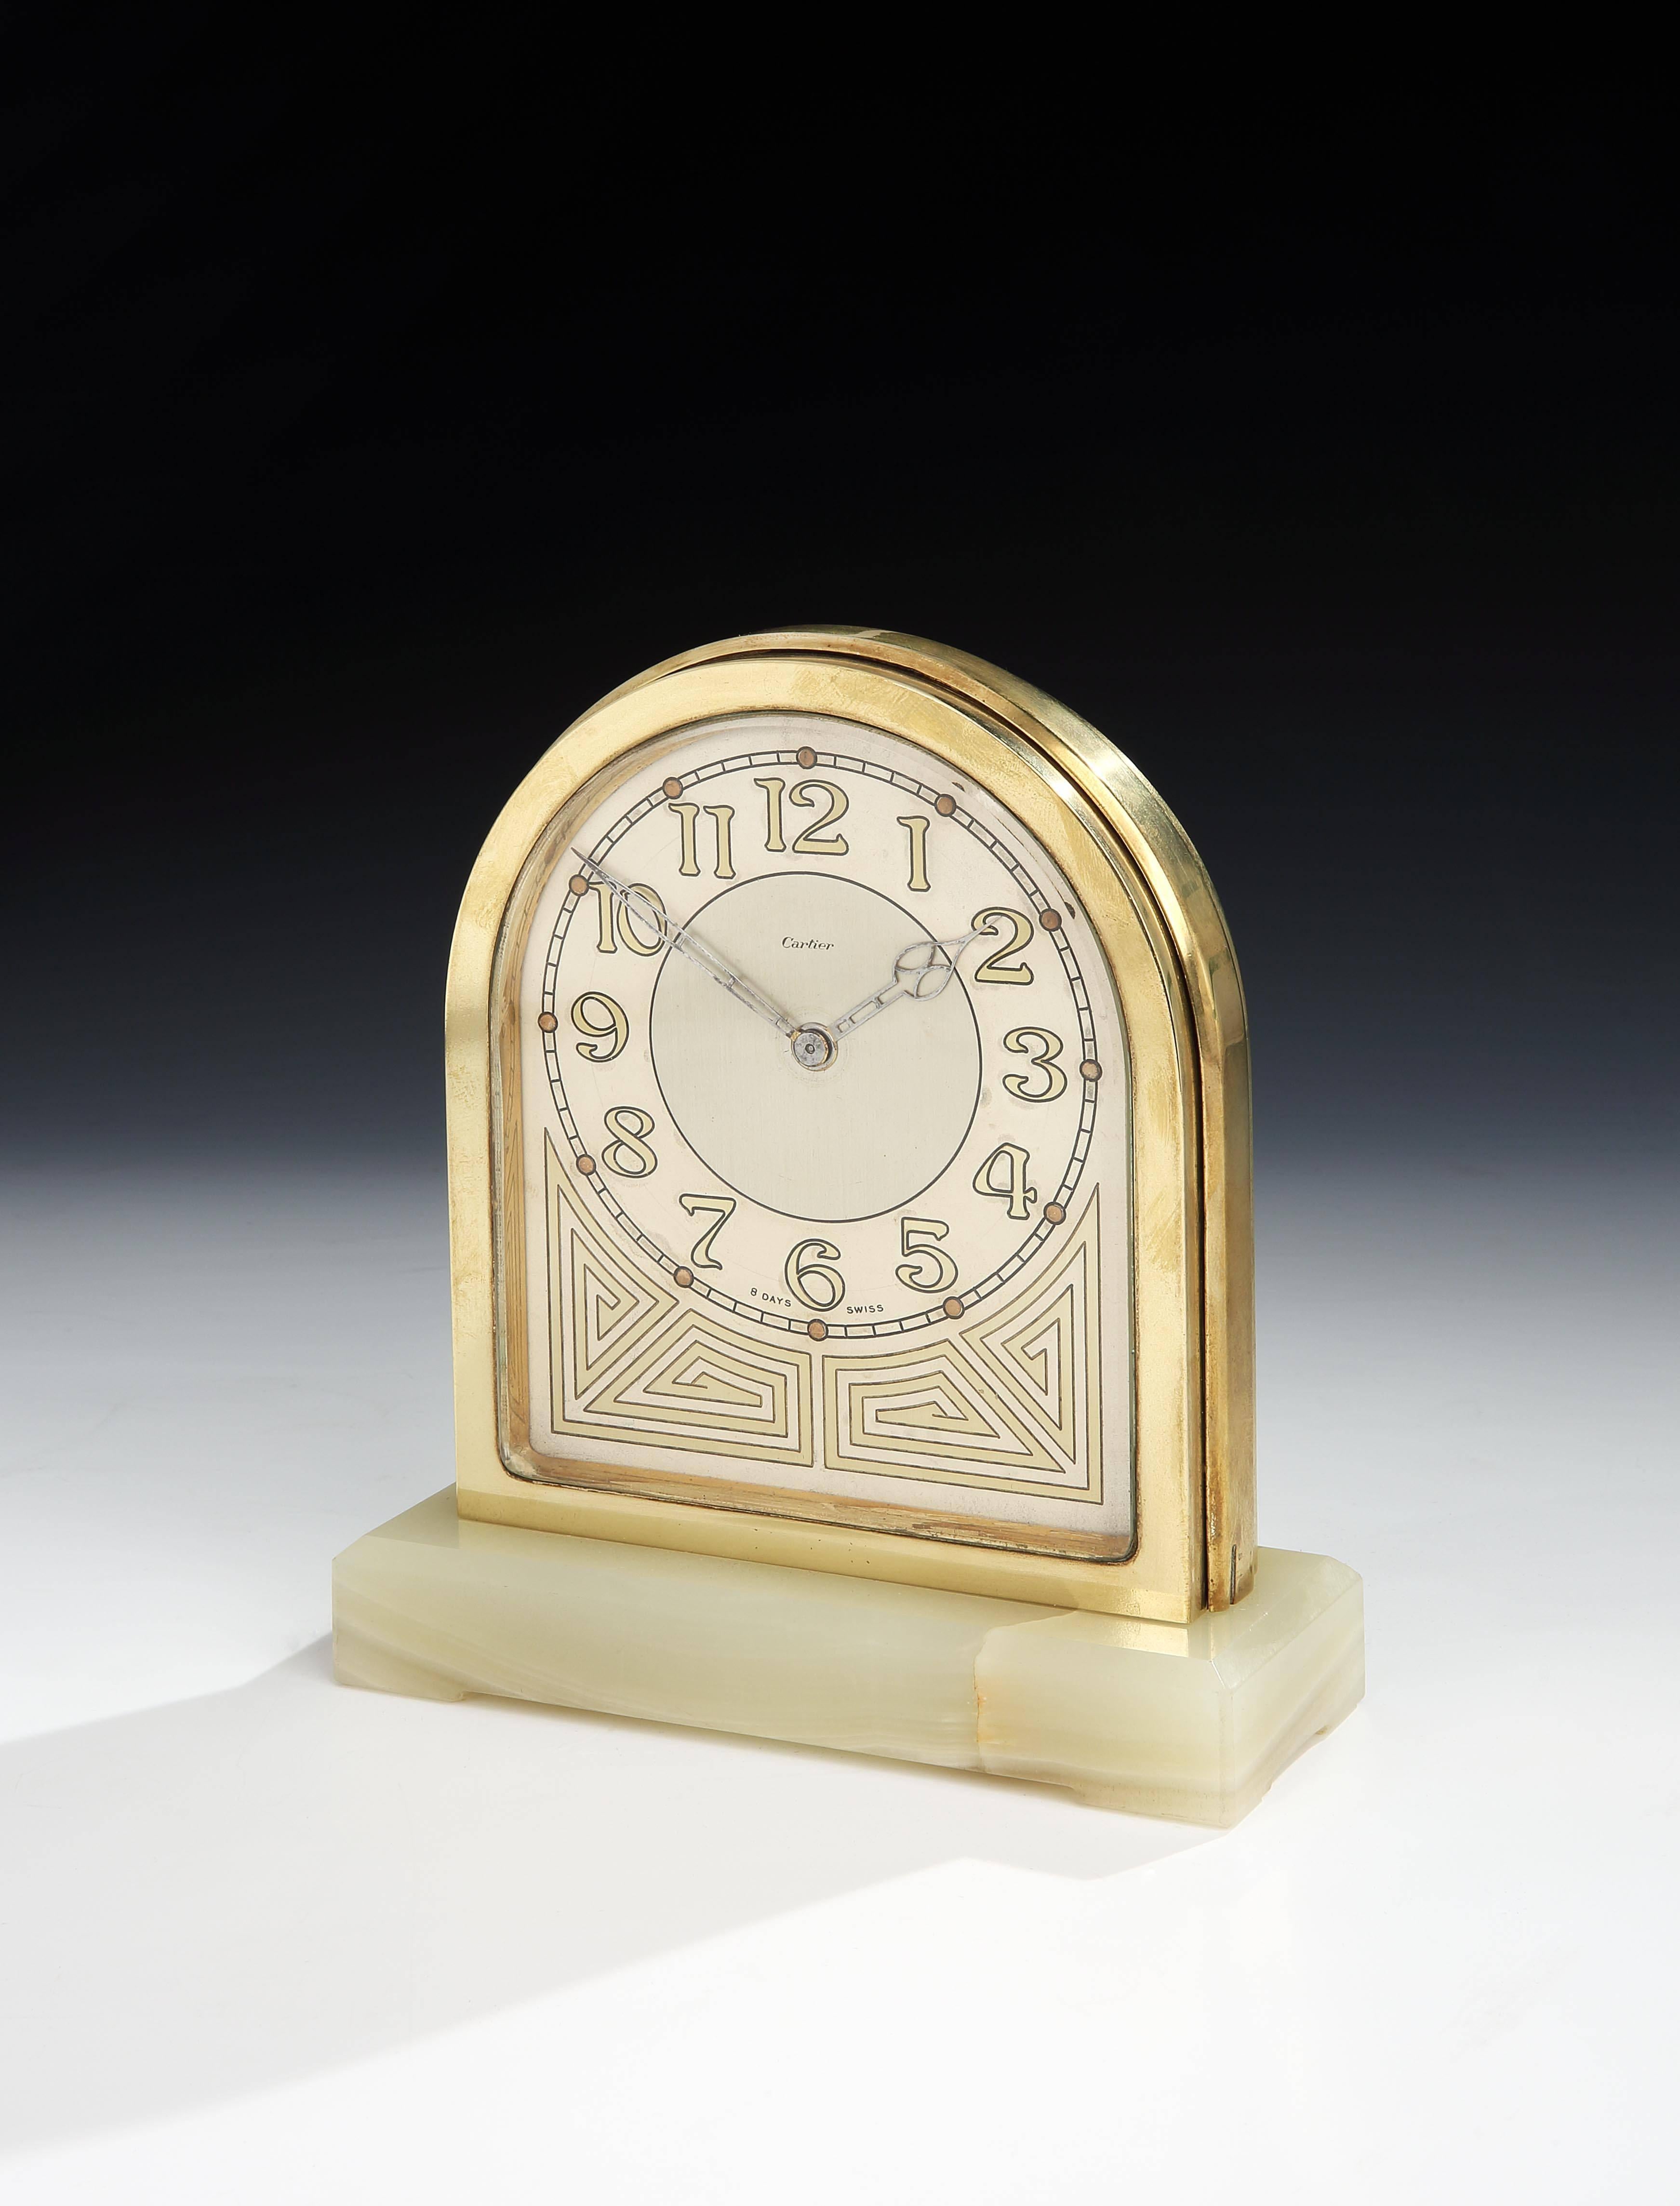 A highly unusual ‘partners’ clock, the arched body in gilded bronze, with clock face to both sides for ‘partners’ sitting opposite each other, both clock faces with identical Art Nouveau numerals and gilt detailing with delicate pierced hands.